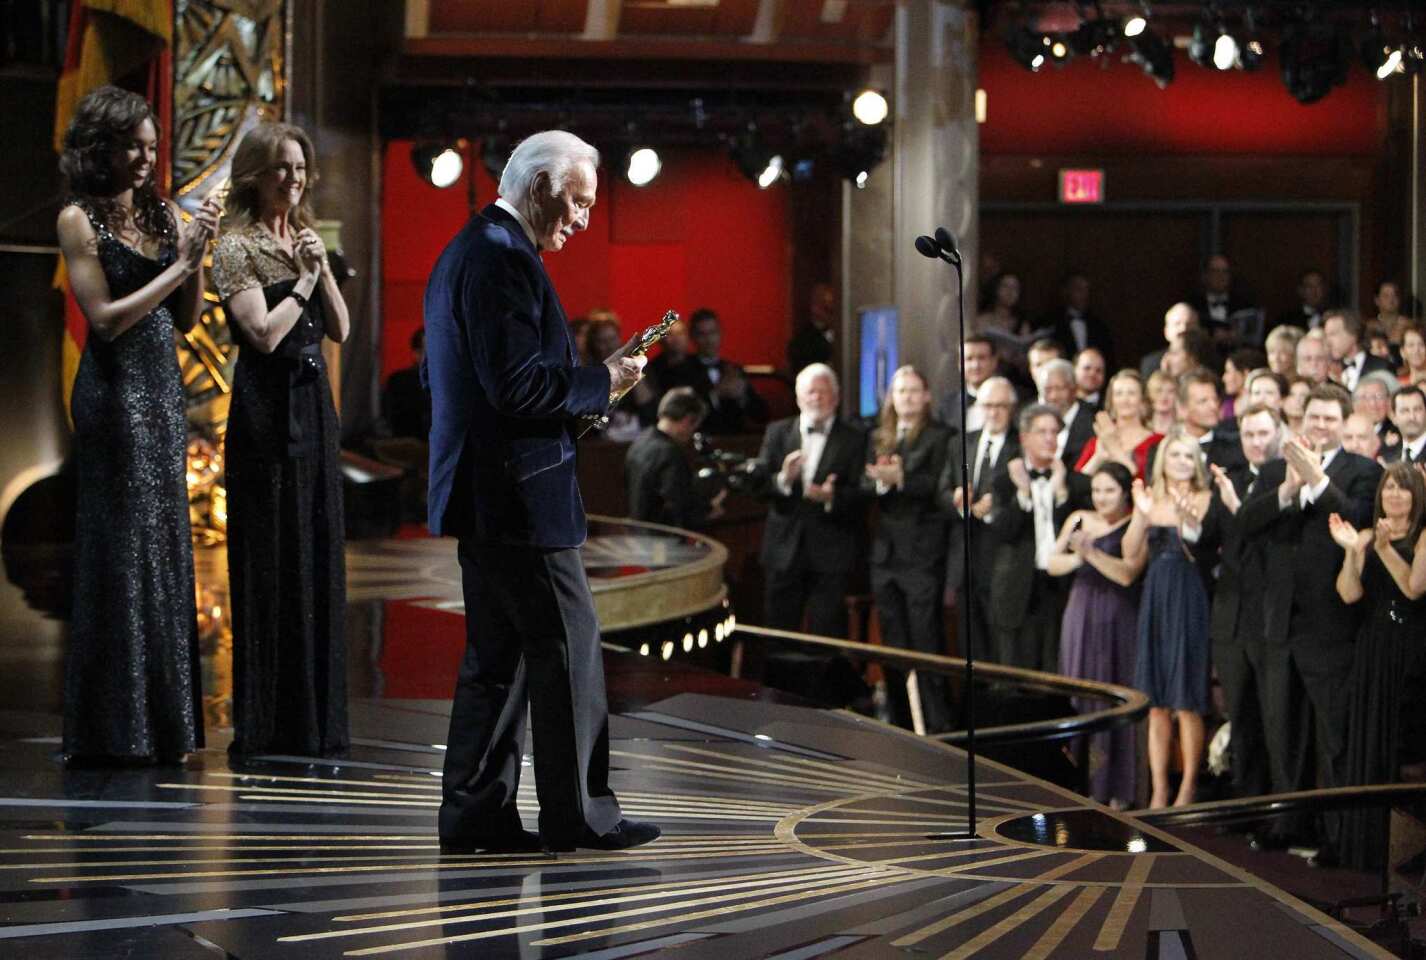 Christopher Plummer accepts his first Academy Award for his supporting role in "Beginners."